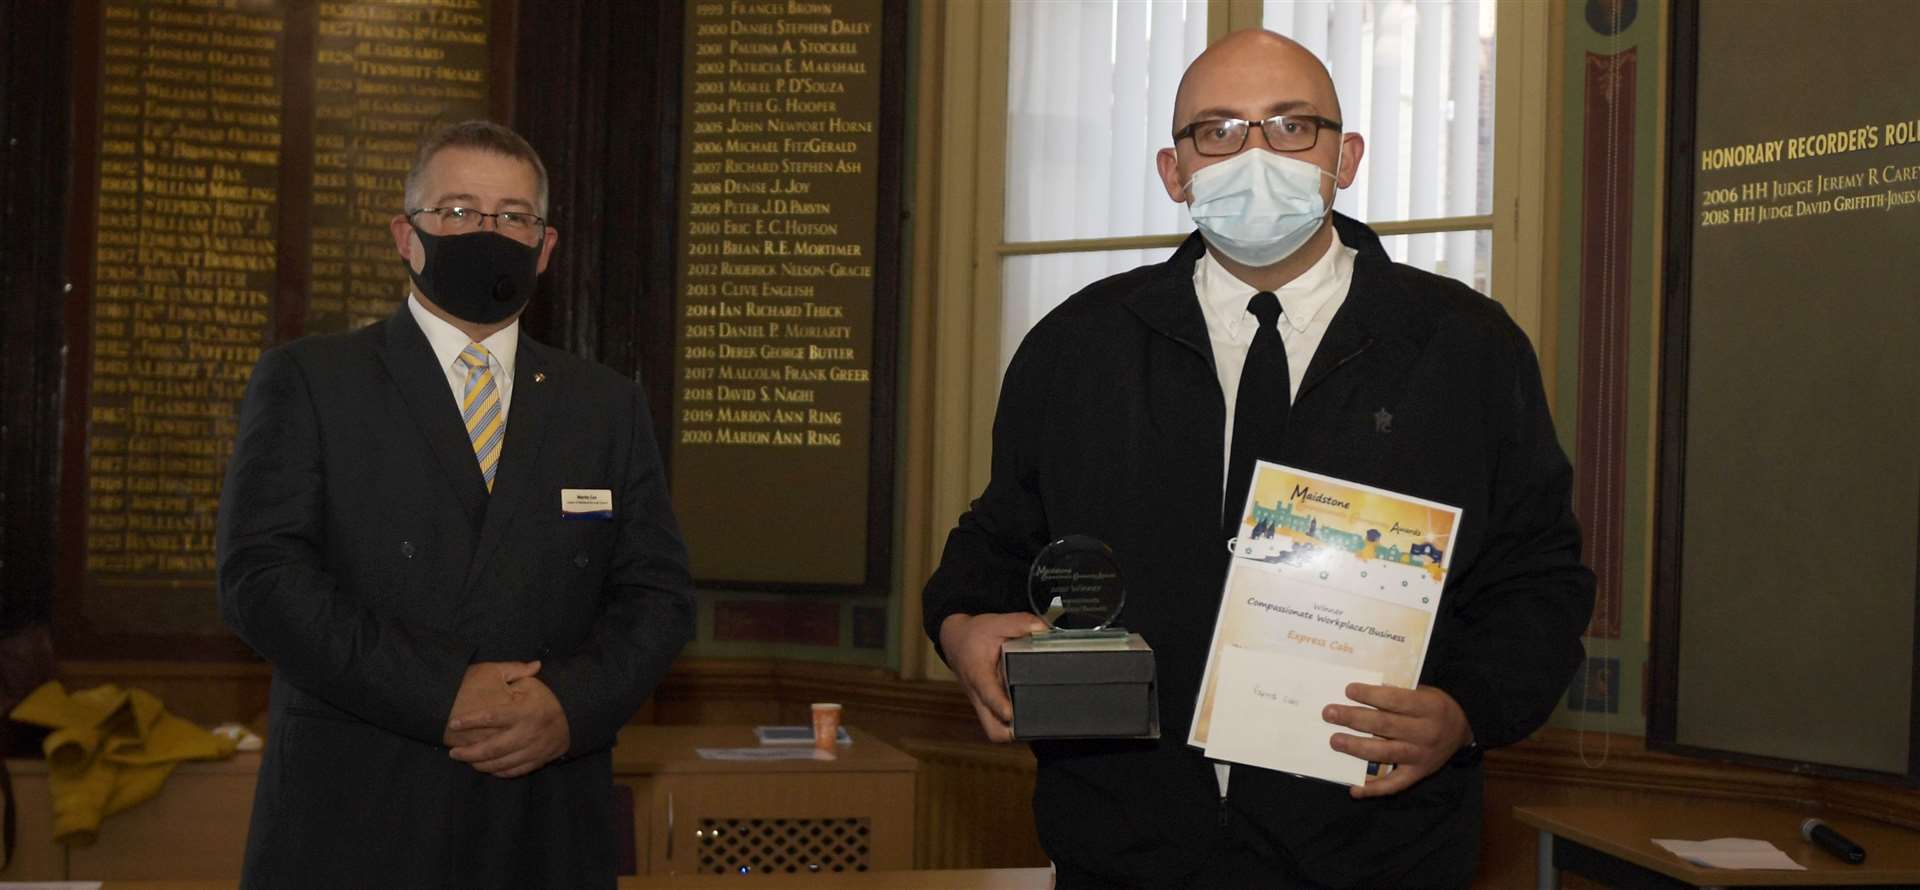 Cllr Martin Cox presented the award for the Compassionate Business/Workplace to Jason Brown from Express Cabs.